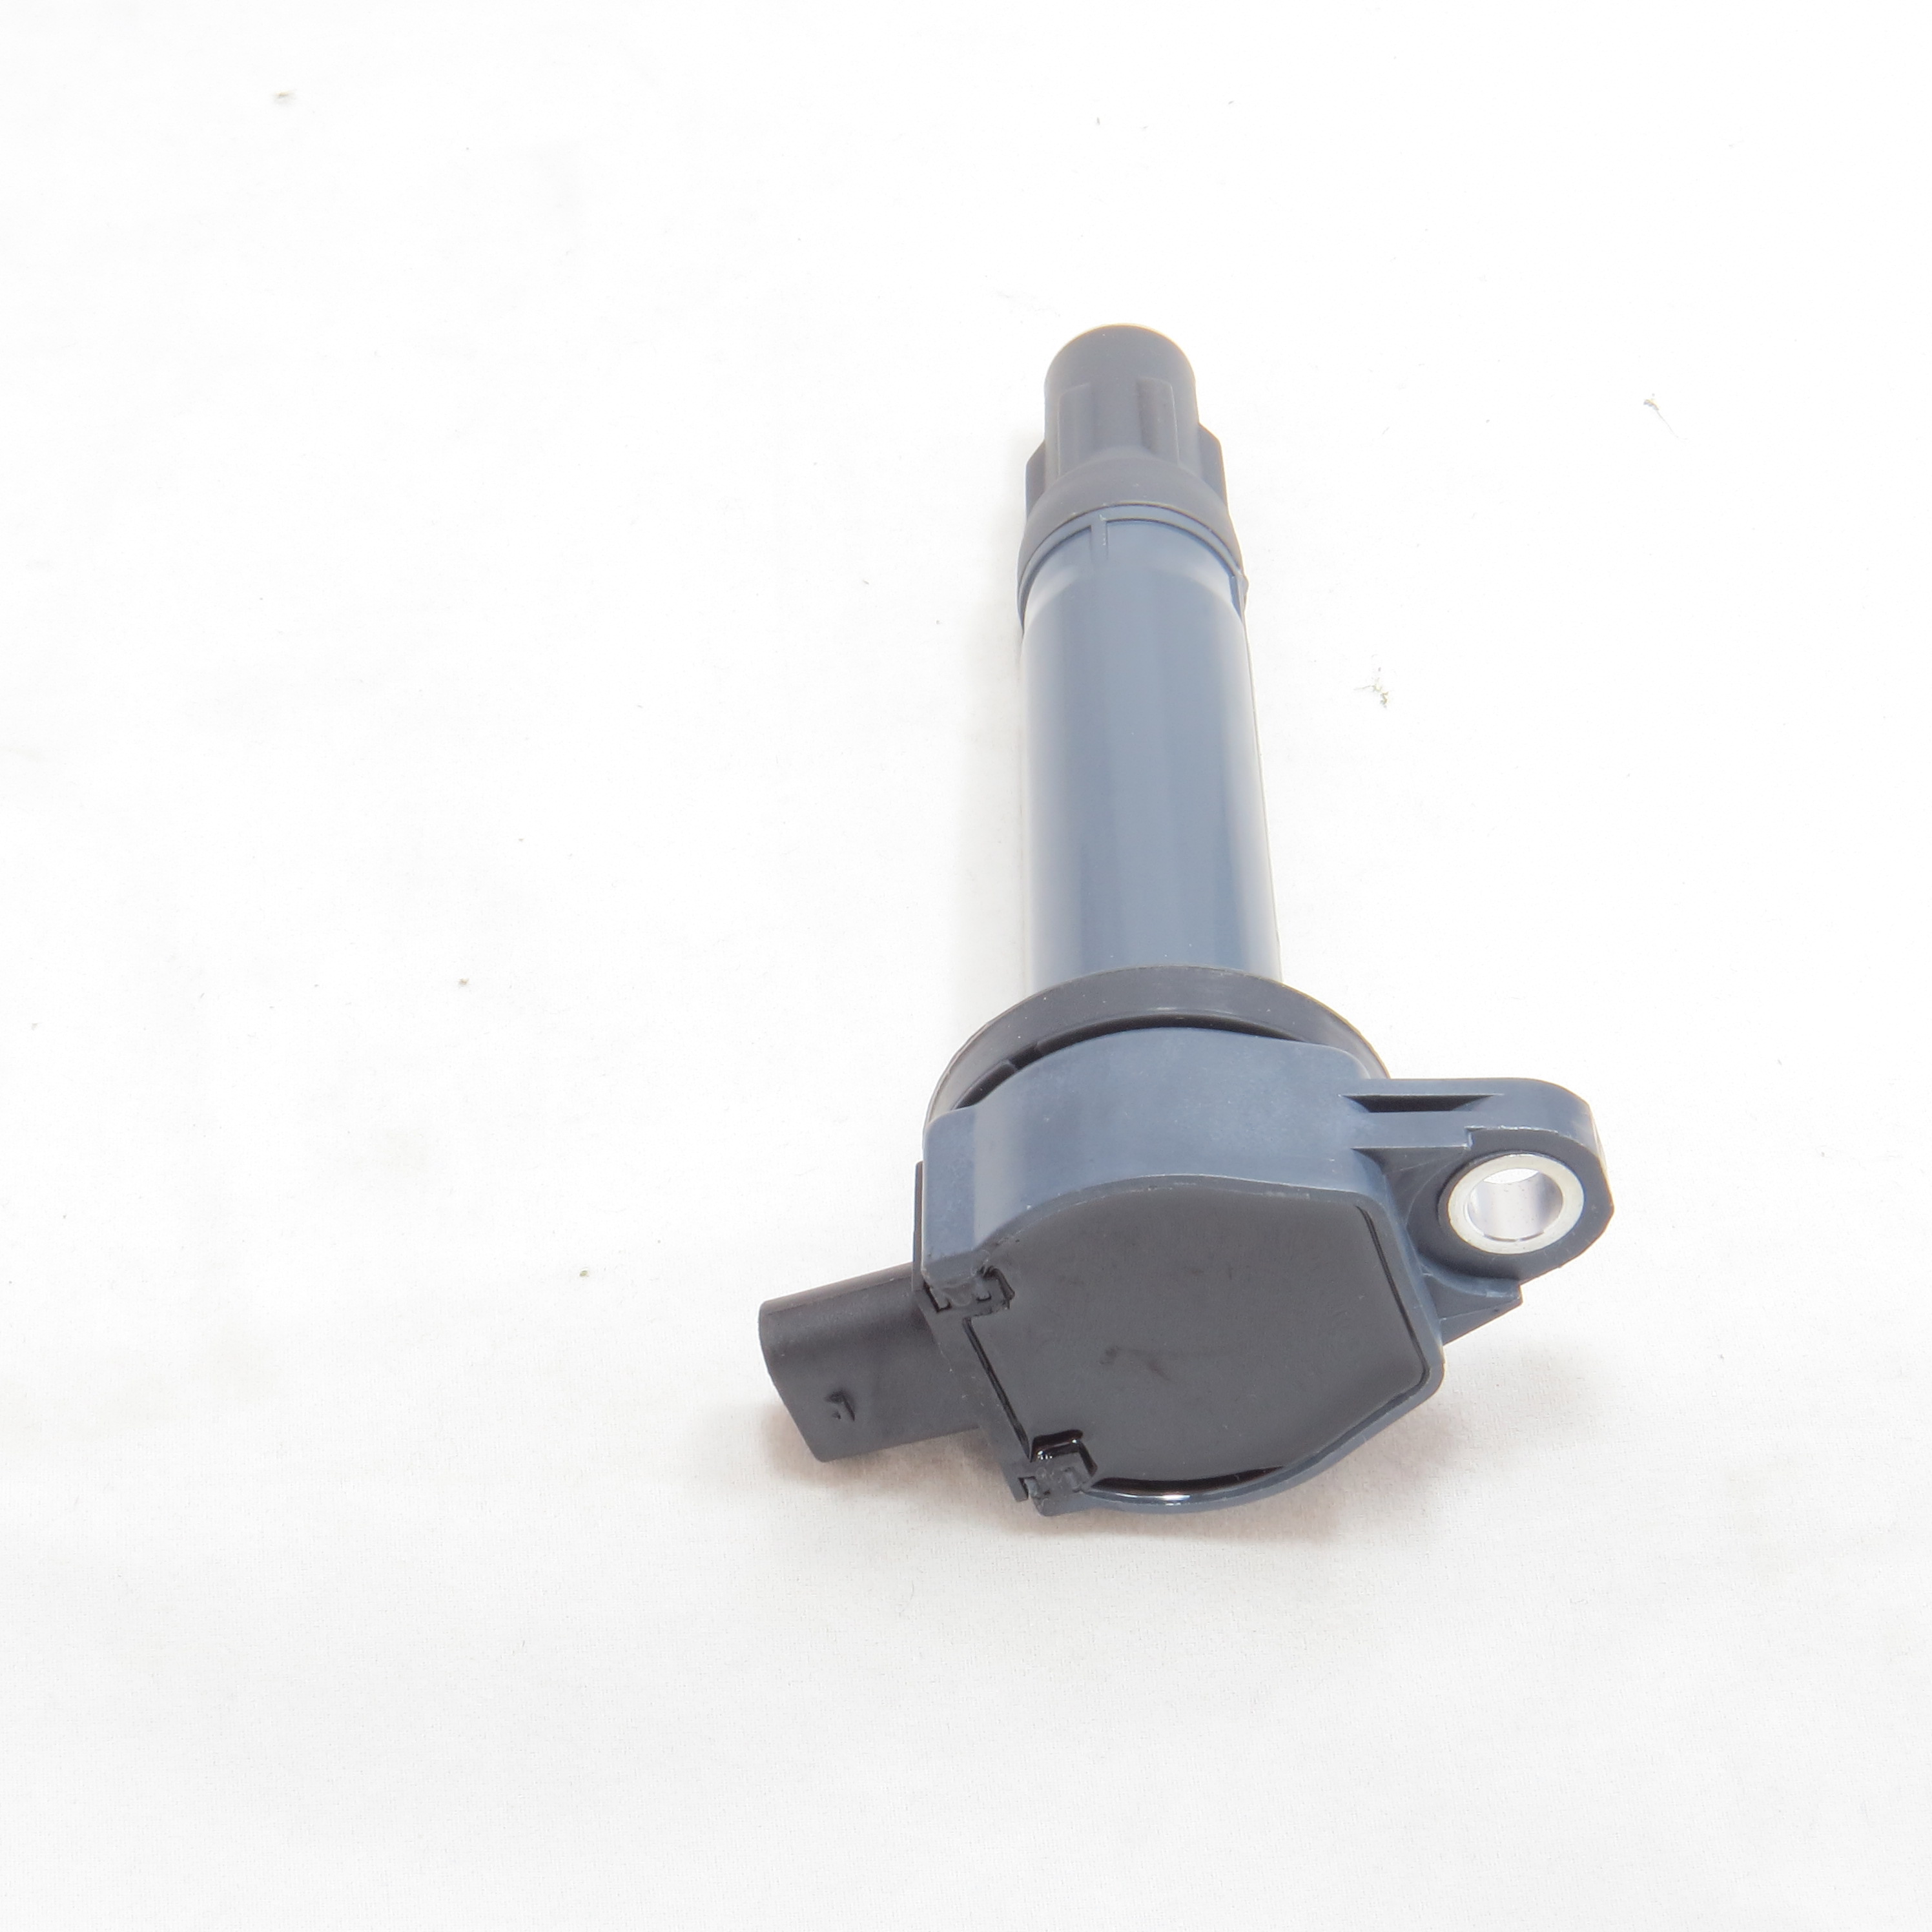 Pictured Here is an Ignition Coil For 2009 Dodge Caliber with the 1.8l, 2.0l, and 2.4l 4 cylinder motor.